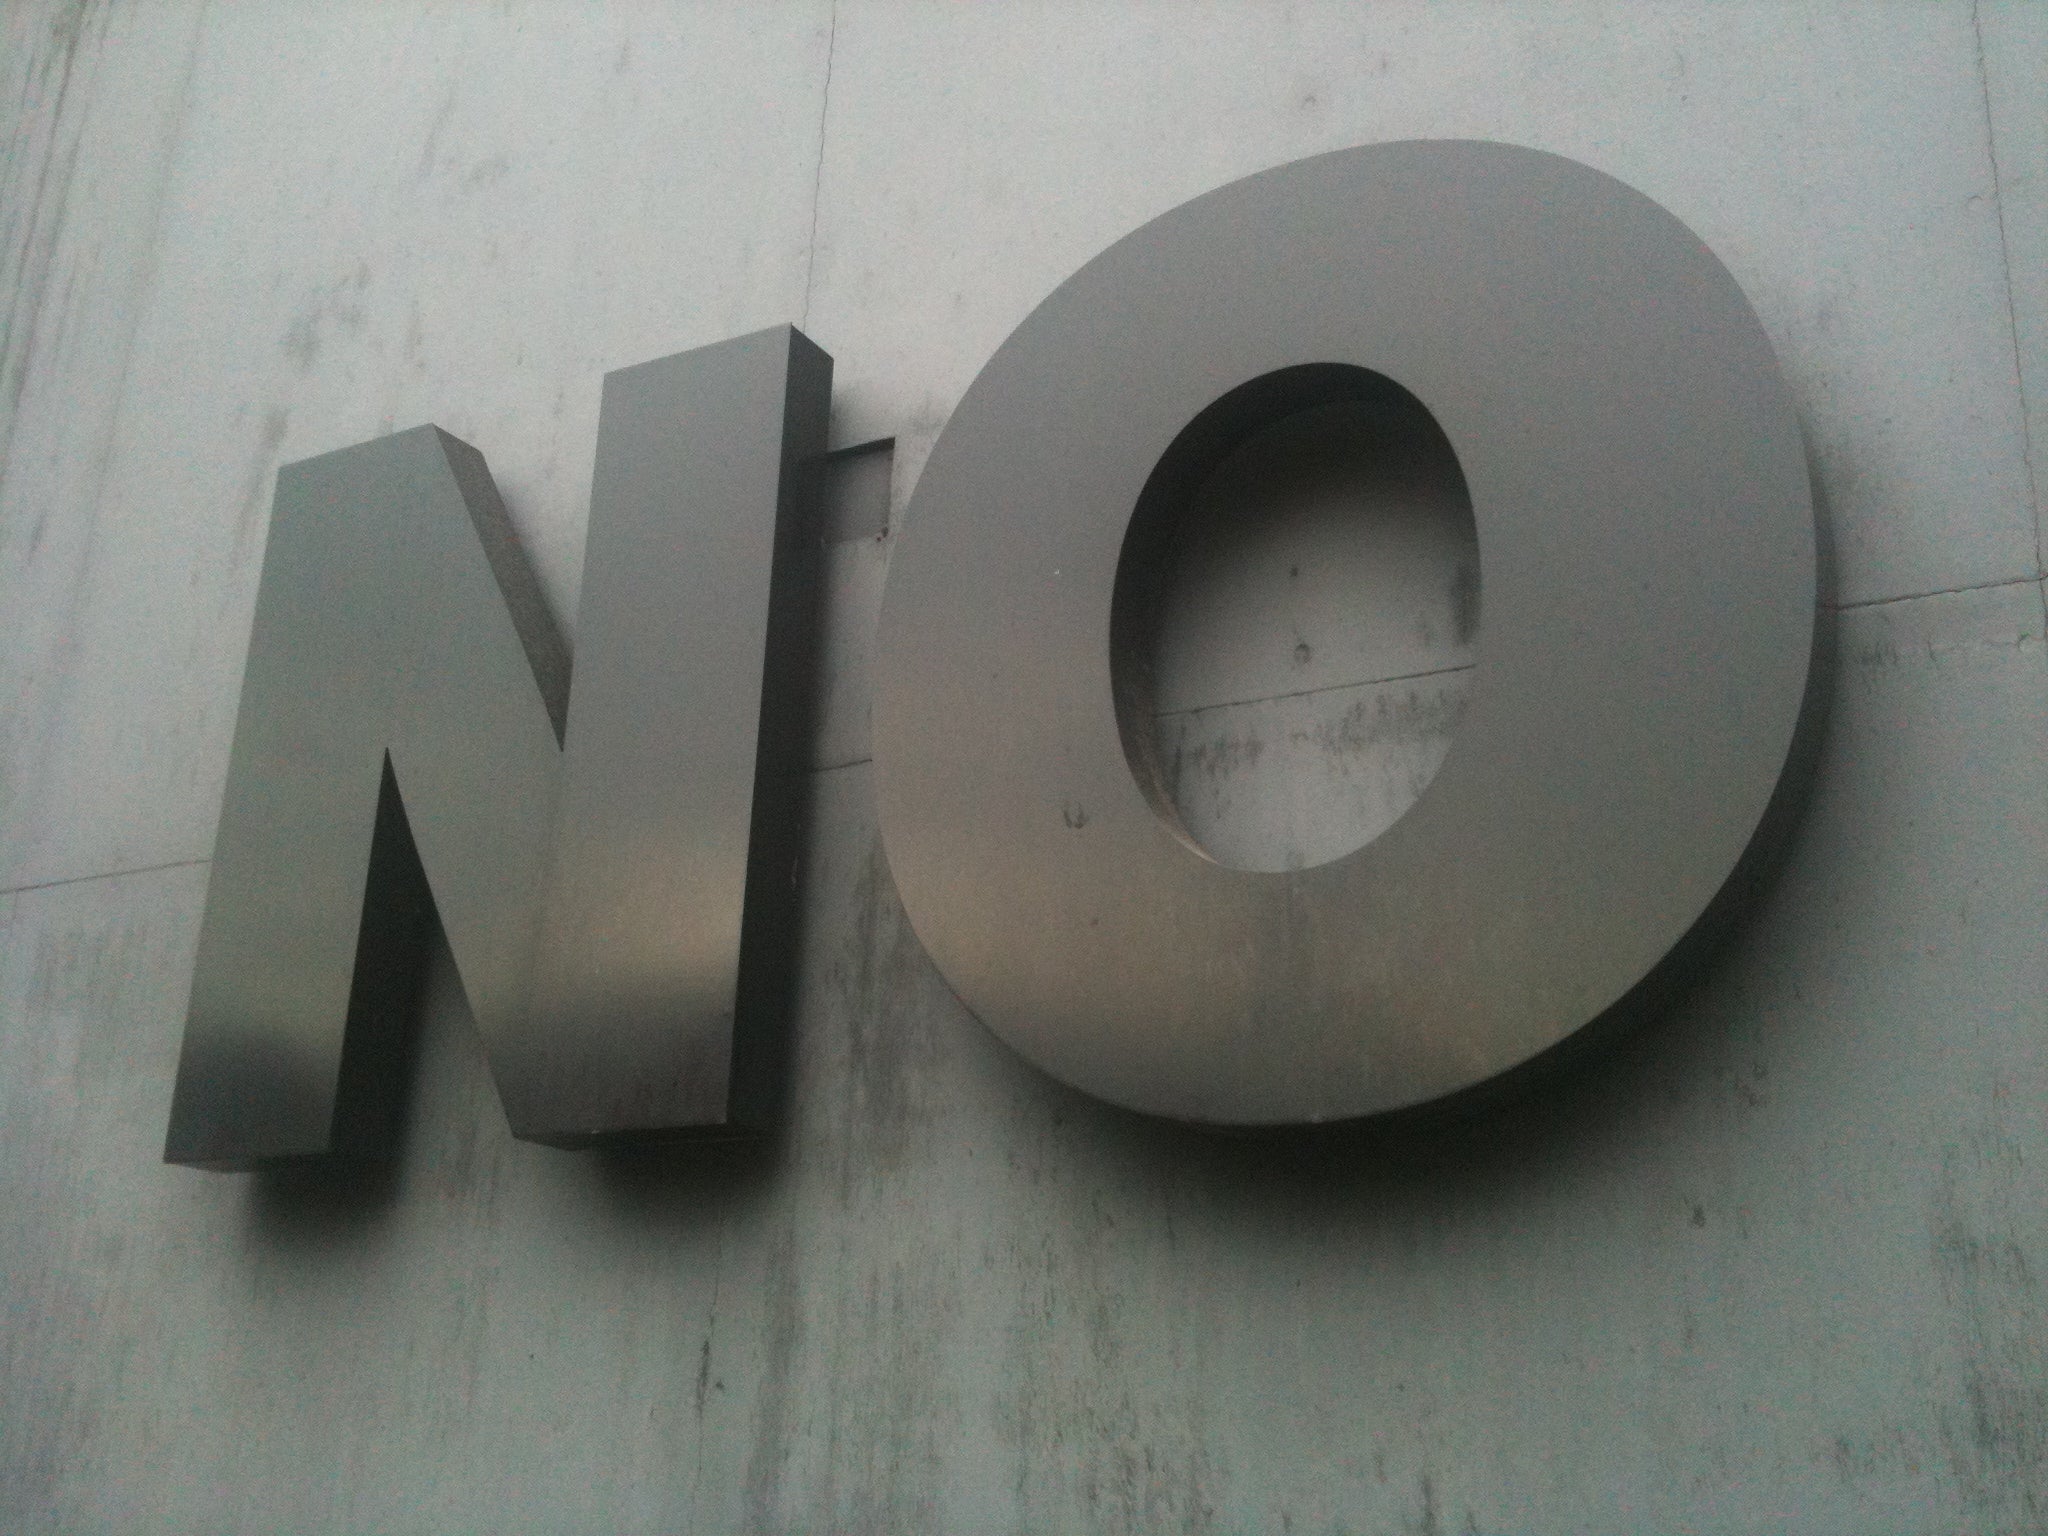 How to Say No (without Feeling Guilty) - Scientific American